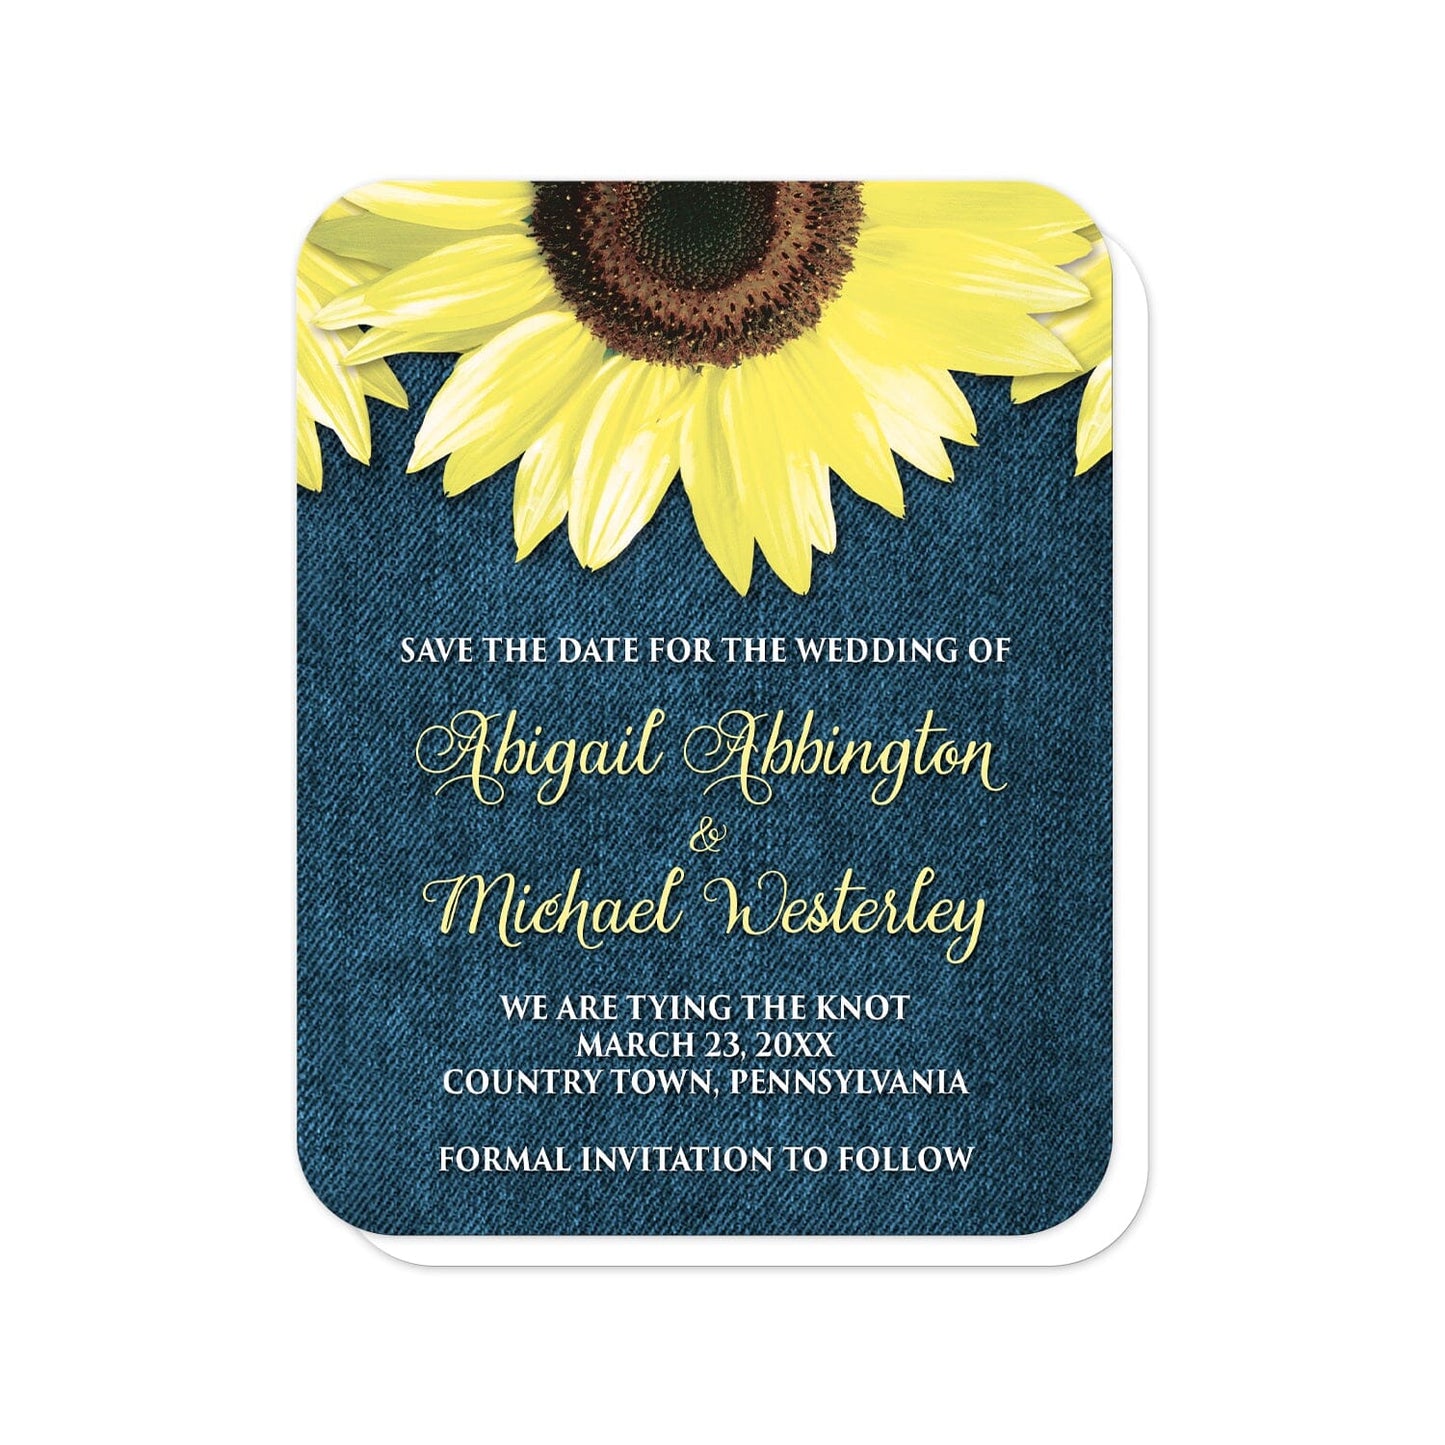 Rustic Sunflower and Denim Save the Date Cards (with rounded corners) at Artistically Invited. Southern-inspired rustic sunflower and denim save the date cards designed with large yellow sunflowers along the top over a country blue denim design. Your personalized wedding date details are custom printed in yellow and white over the blue denim background below the pretty sunflowers. 